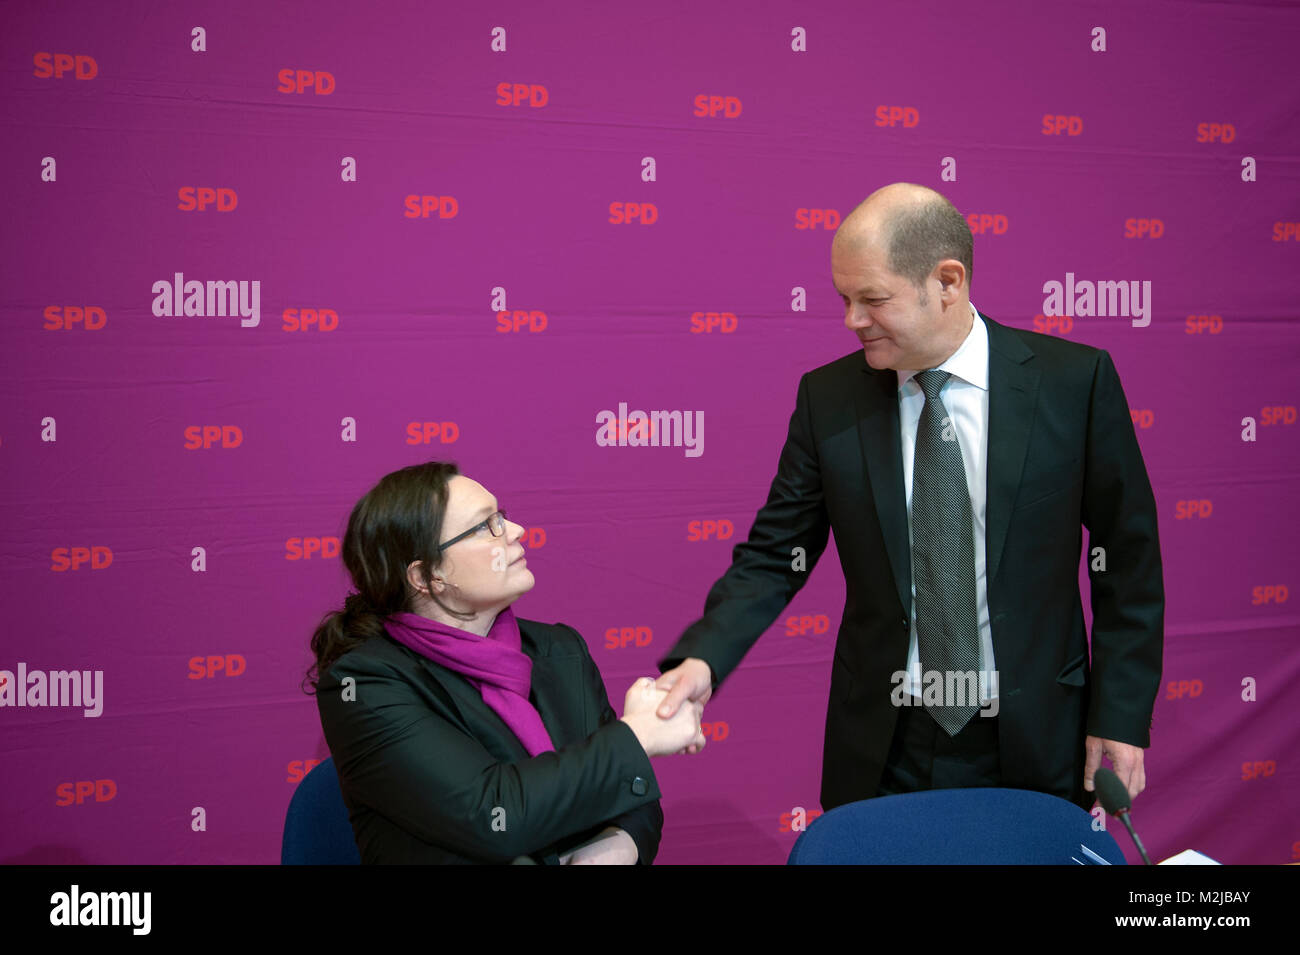 SPD party executive meeting. Social Democratic Party of Germany is a social-democratic political party in Germany. Andreas Nahles and Olaf Scholz. Stock Photo